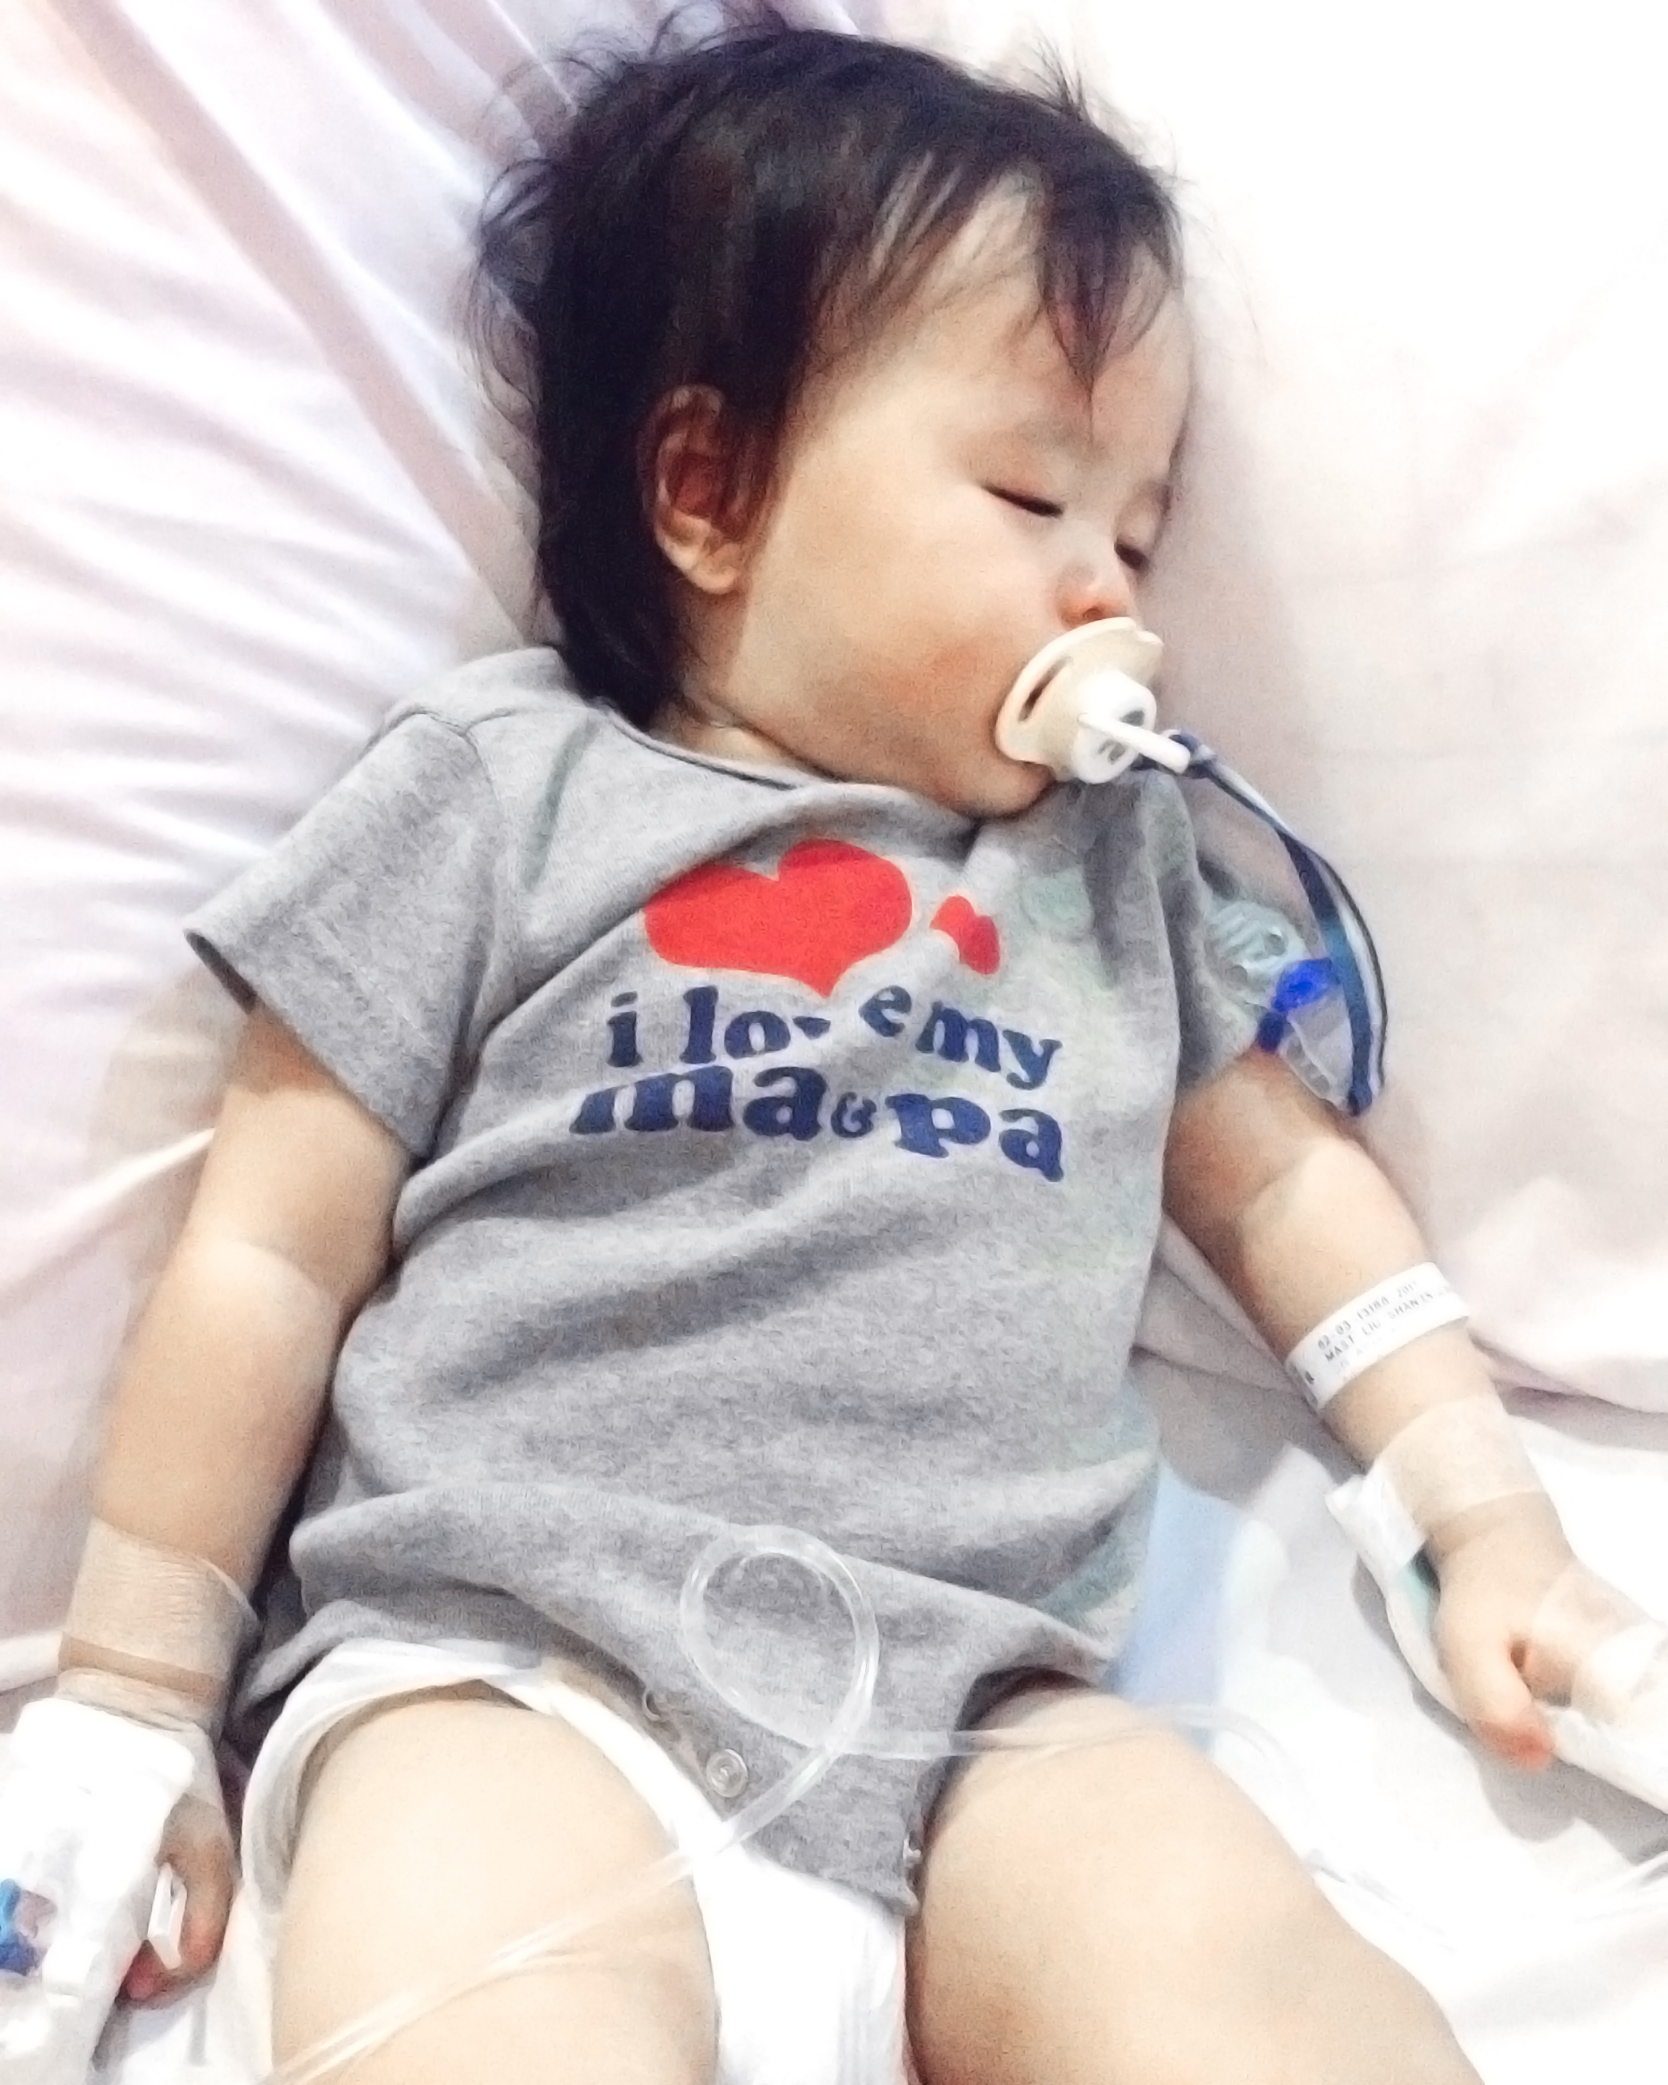 hospitalization stay for child in singapore thomson medical centre for bronchiolitis